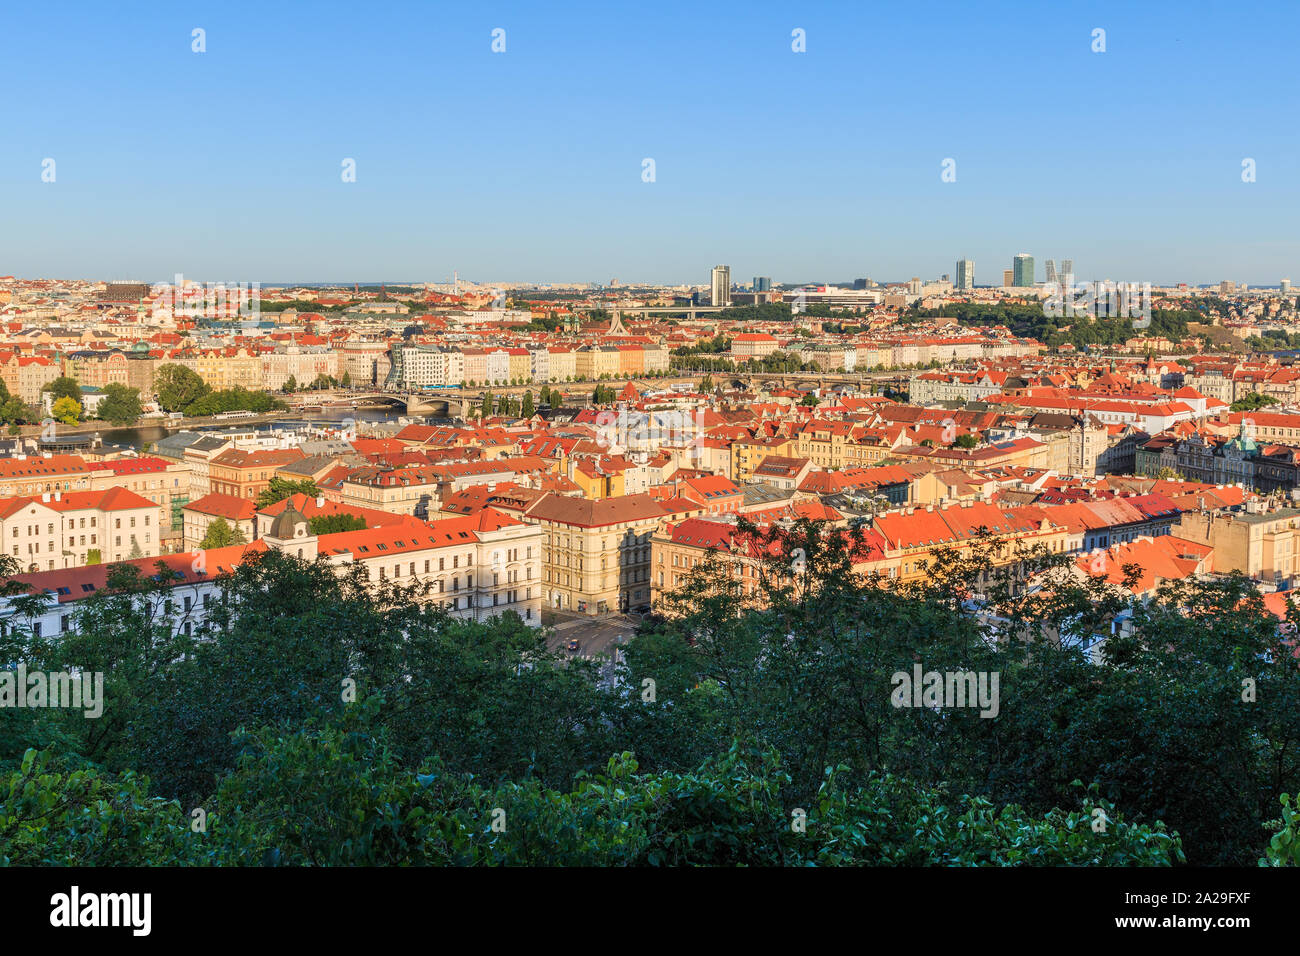 Panoramic view over the roofs and historical buildings of Prague the capital of the Czech Republic in a sunny day with trees and shrubs in foreground Stock Photo